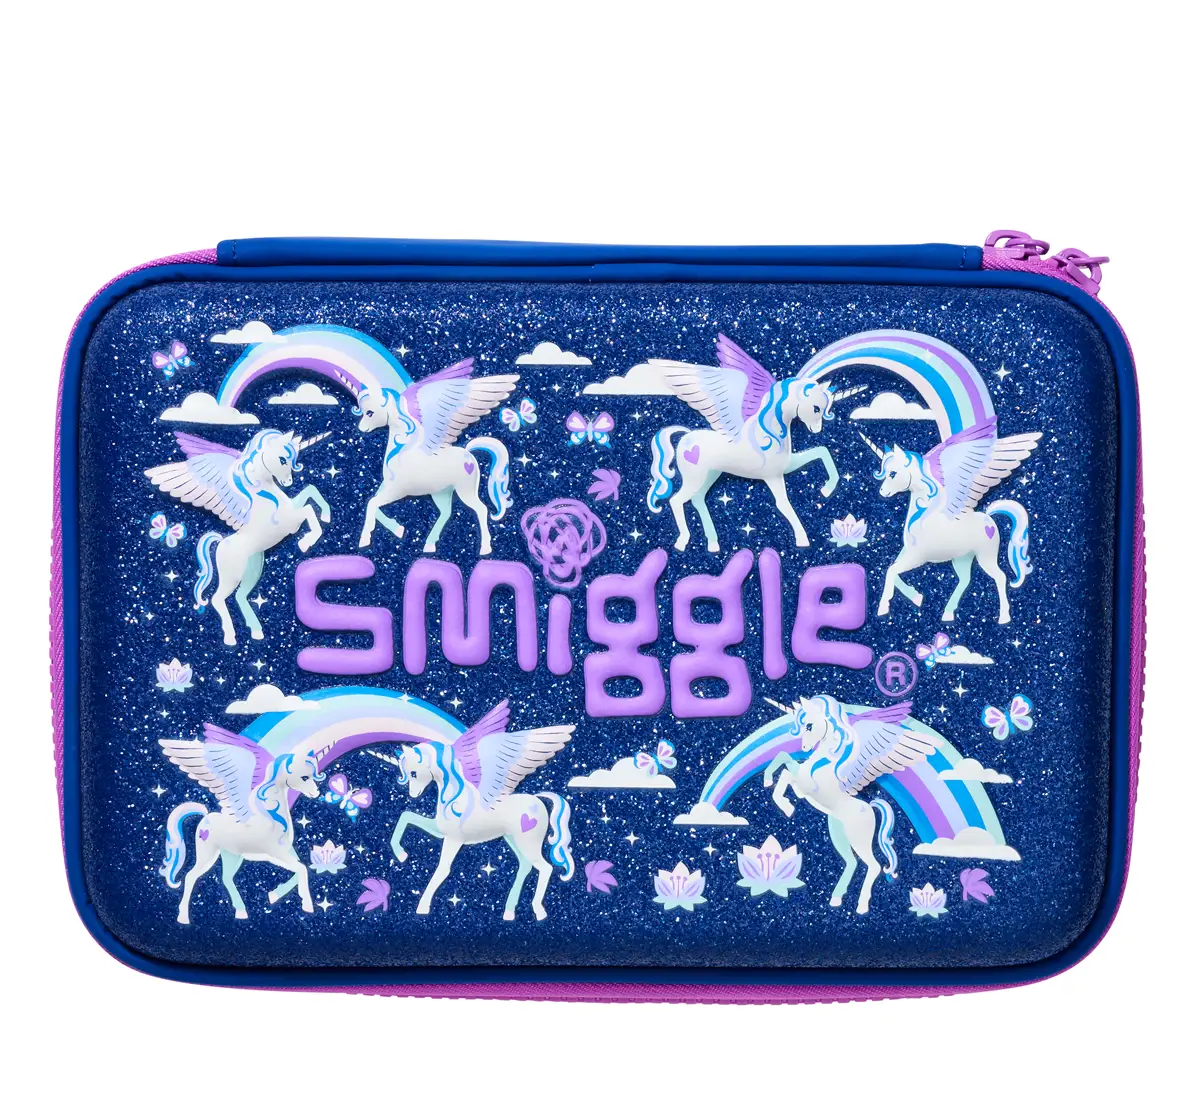 Smiggle Away Hard Top Double Up Pencil Case, Navy Blue, 3Y+